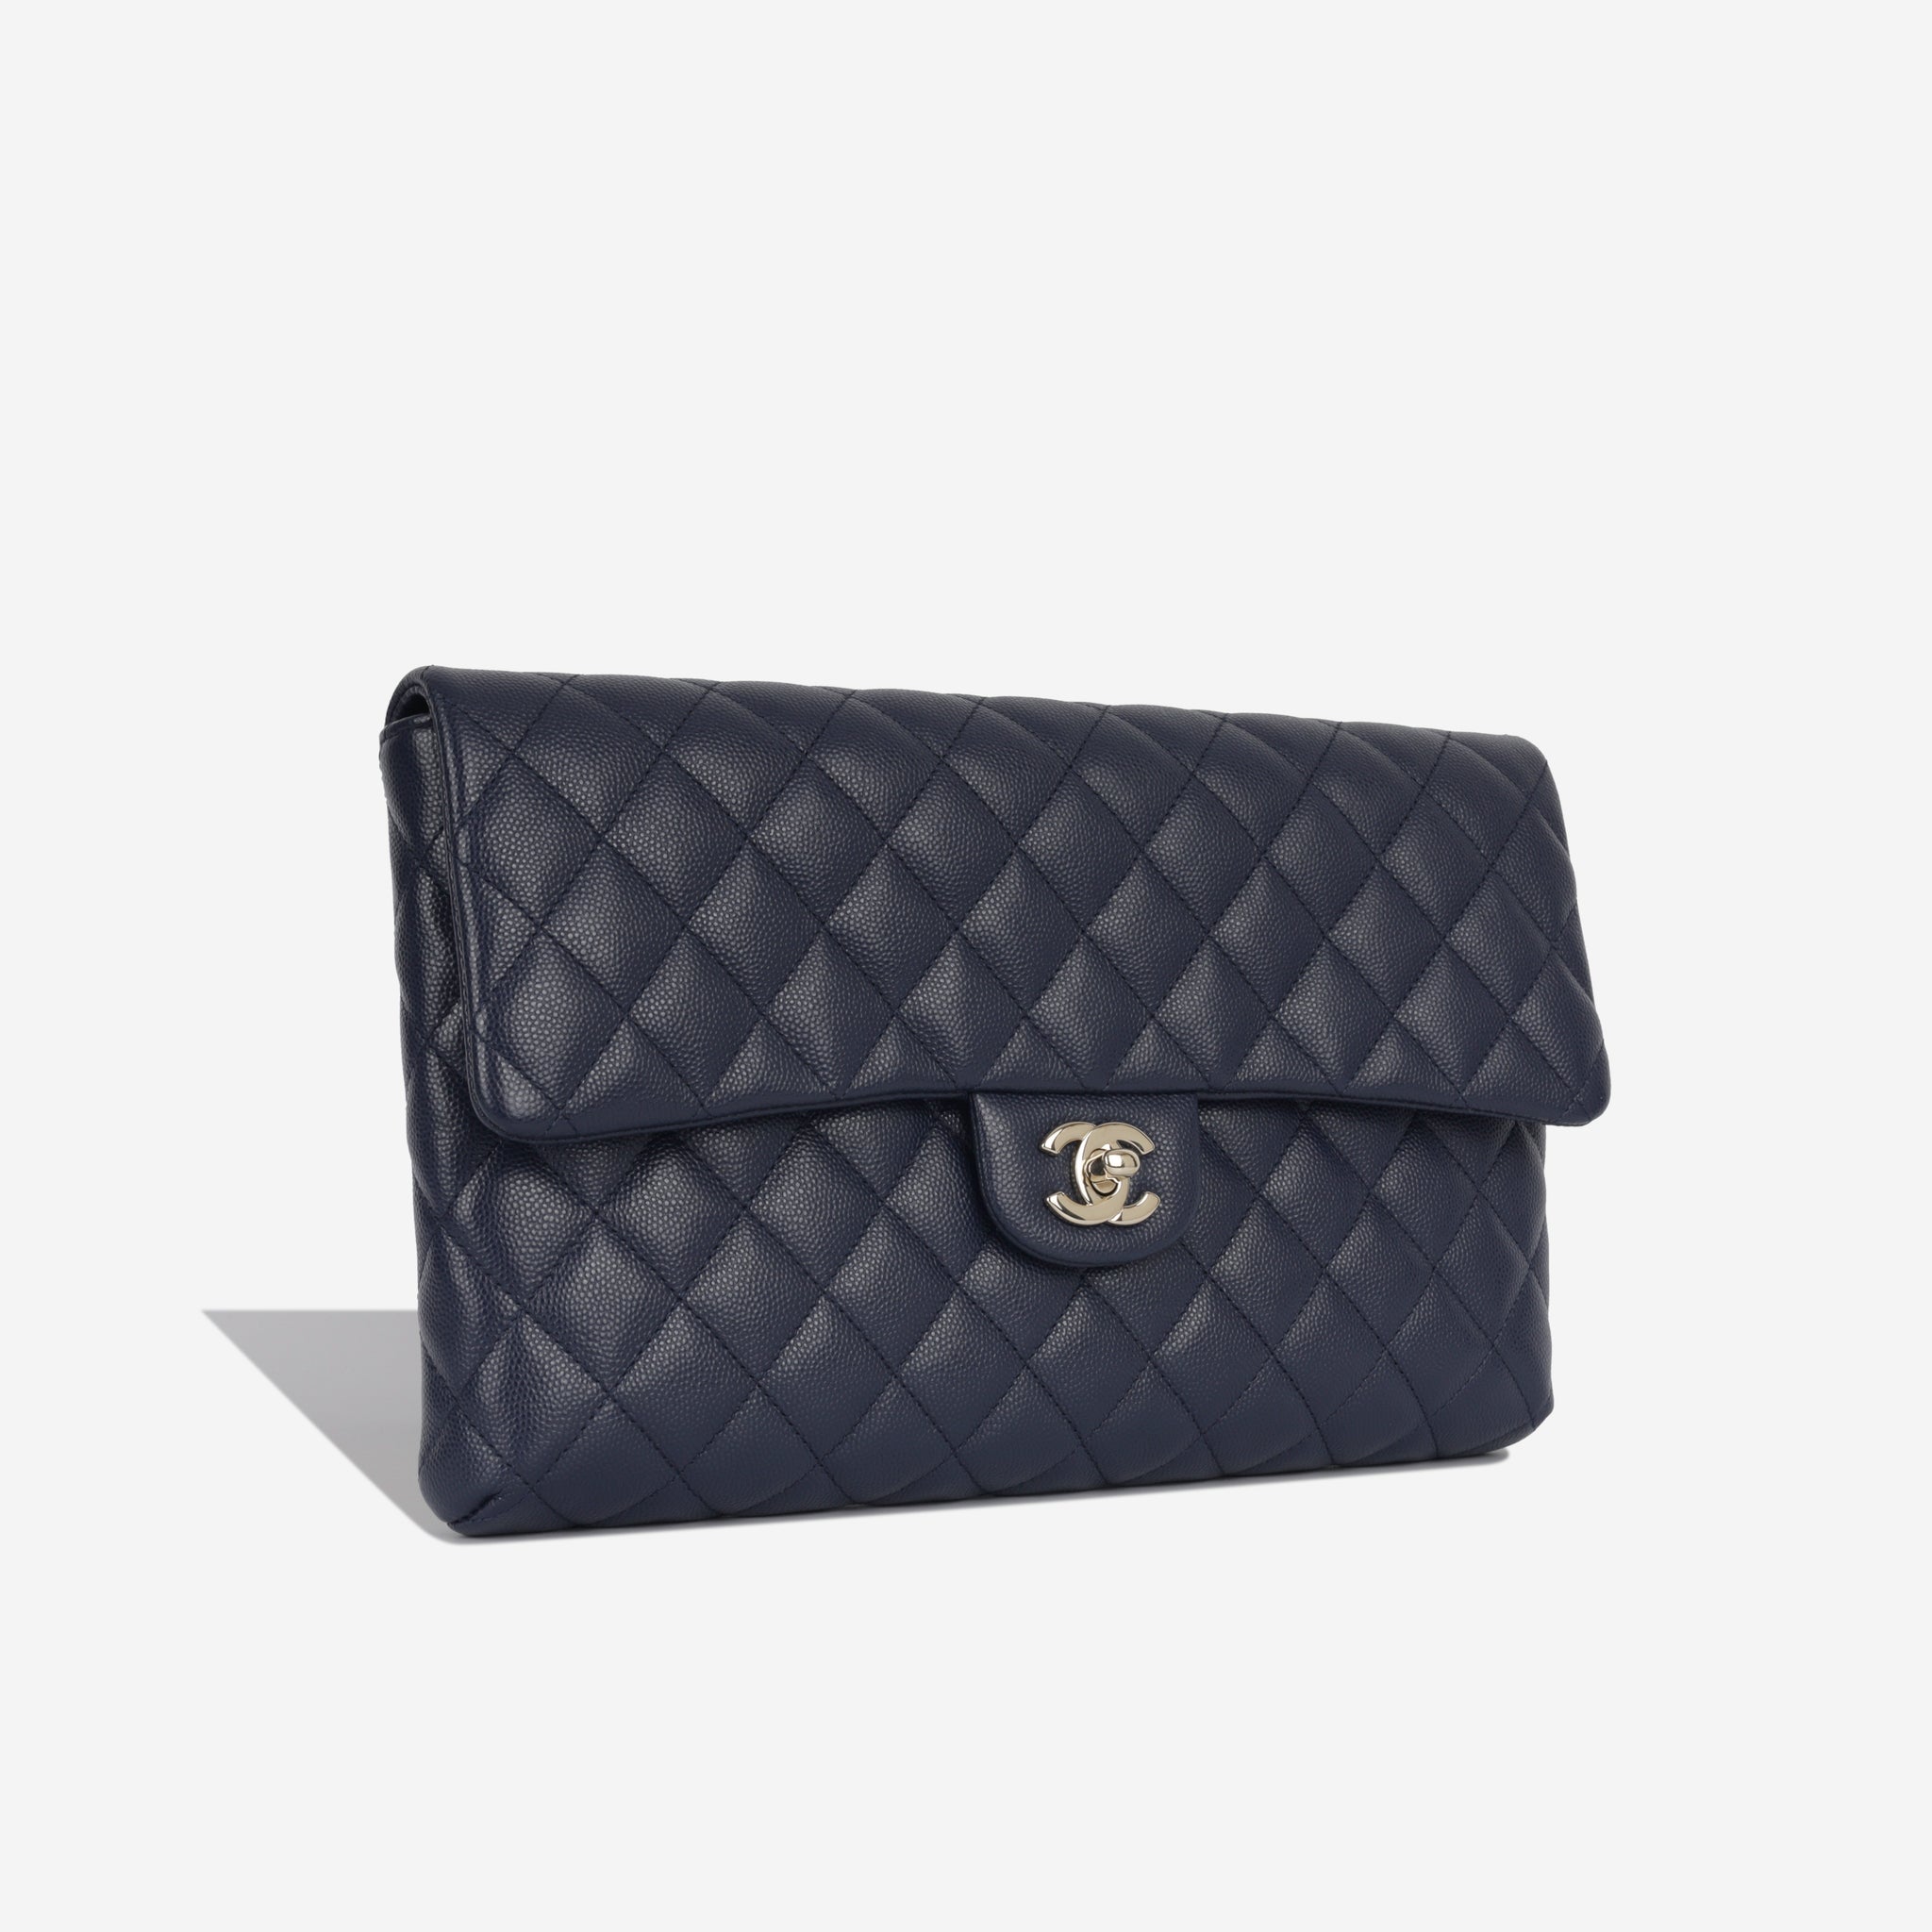 Chanel - Timeless Clutch - Navy Caviar - SHW - Excellent